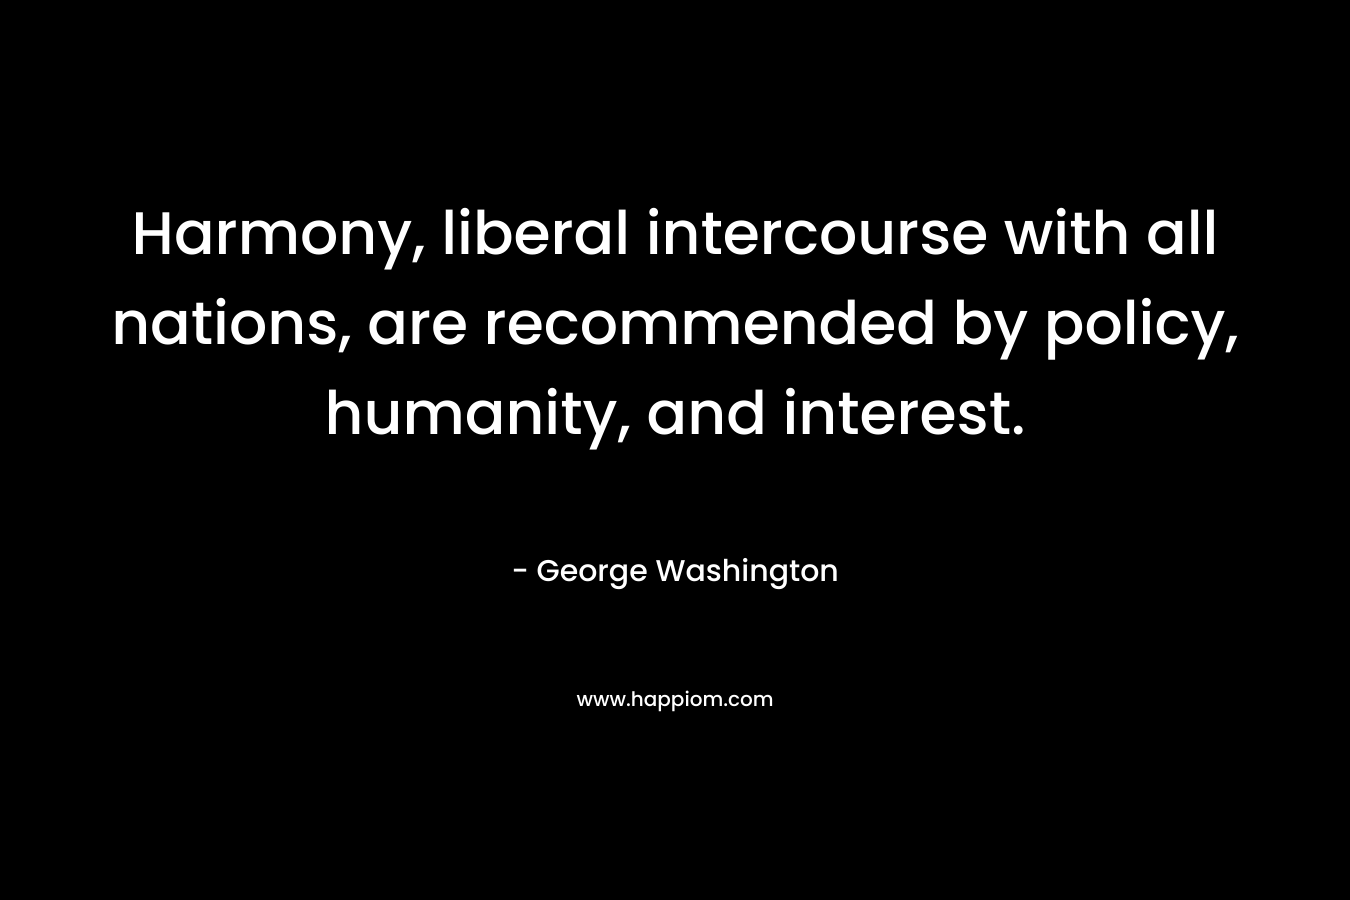 Harmony, liberal intercourse with all nations, are recommended by policy, humanity, and interest. – George Washington